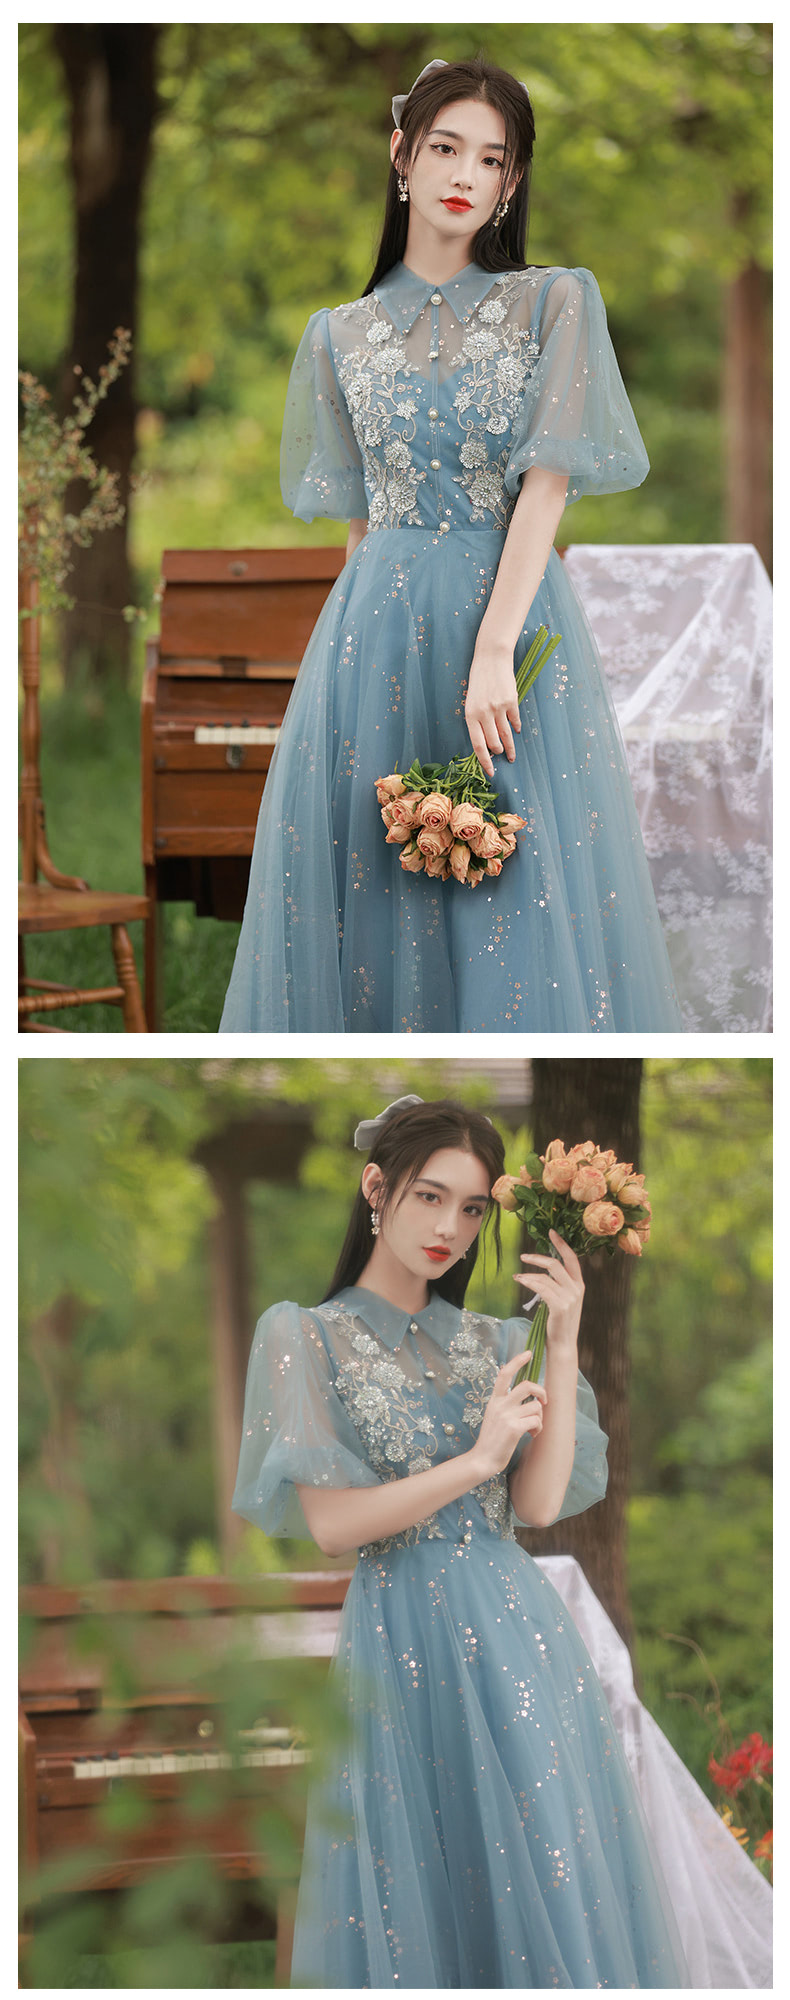 Charming Sweet Square Collar Blue Floral Embroidered Evening Party Dress10